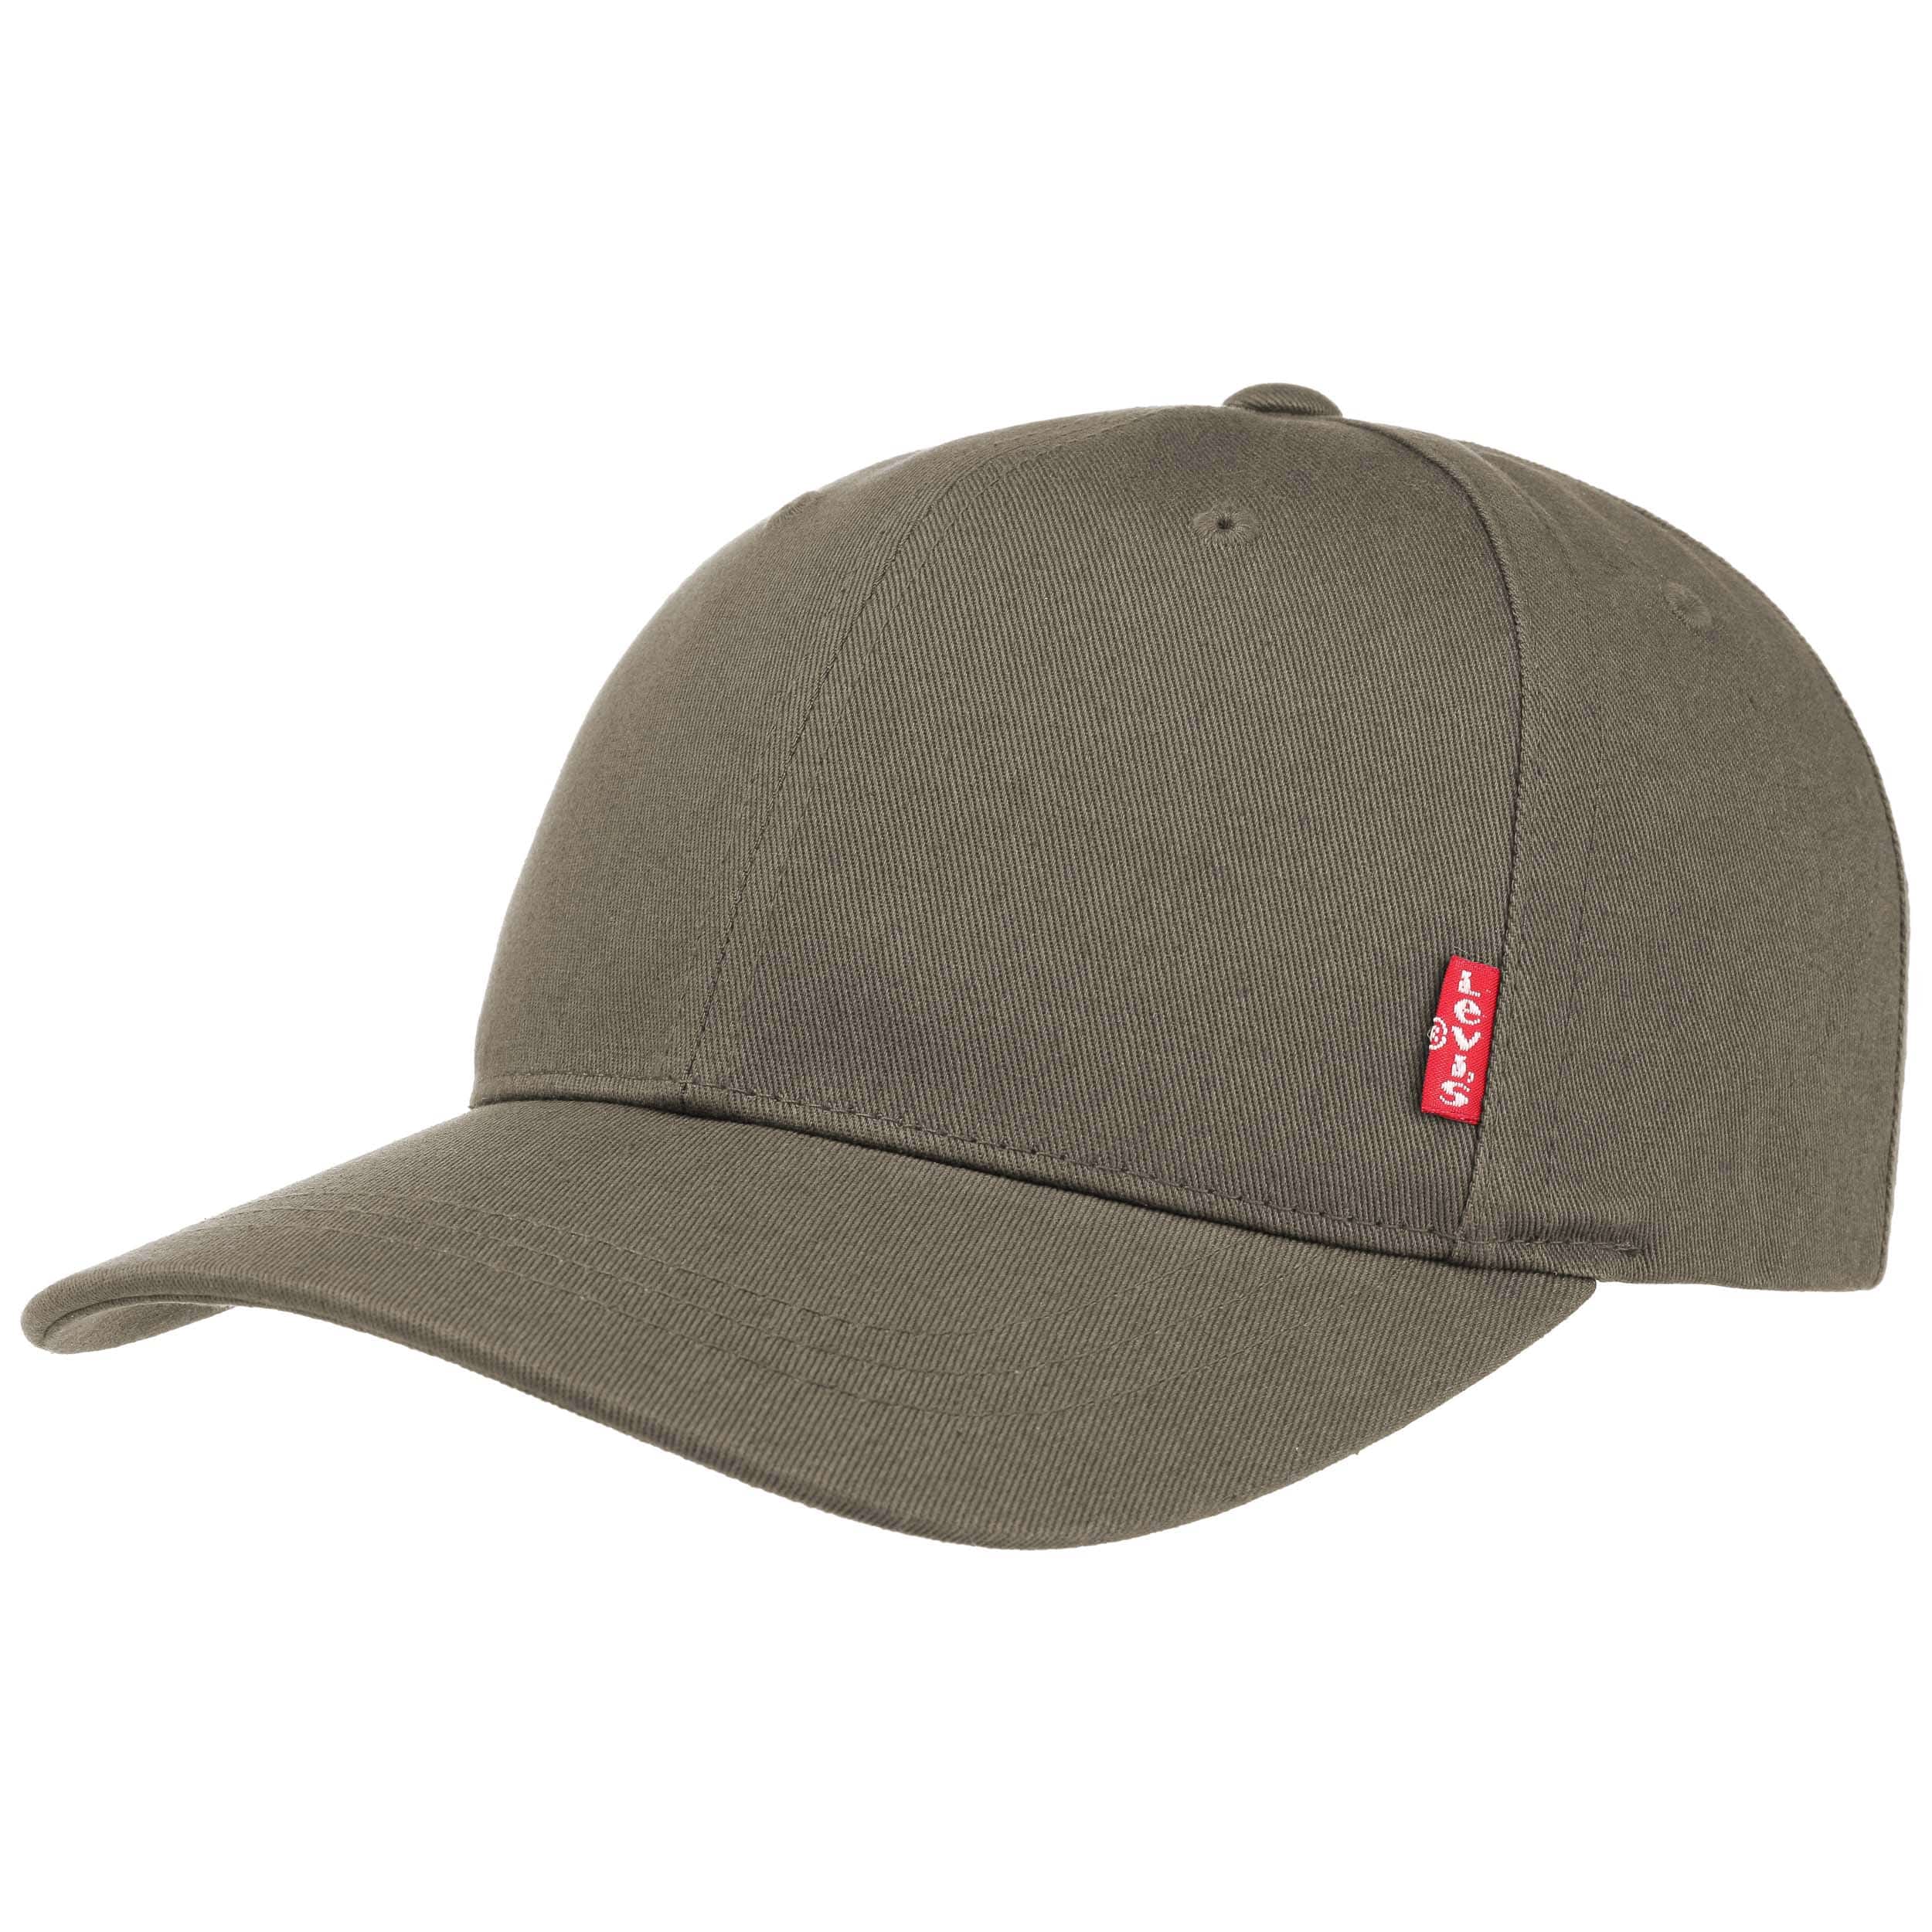 Classic Twill Red Tab Cap by Levi´s 